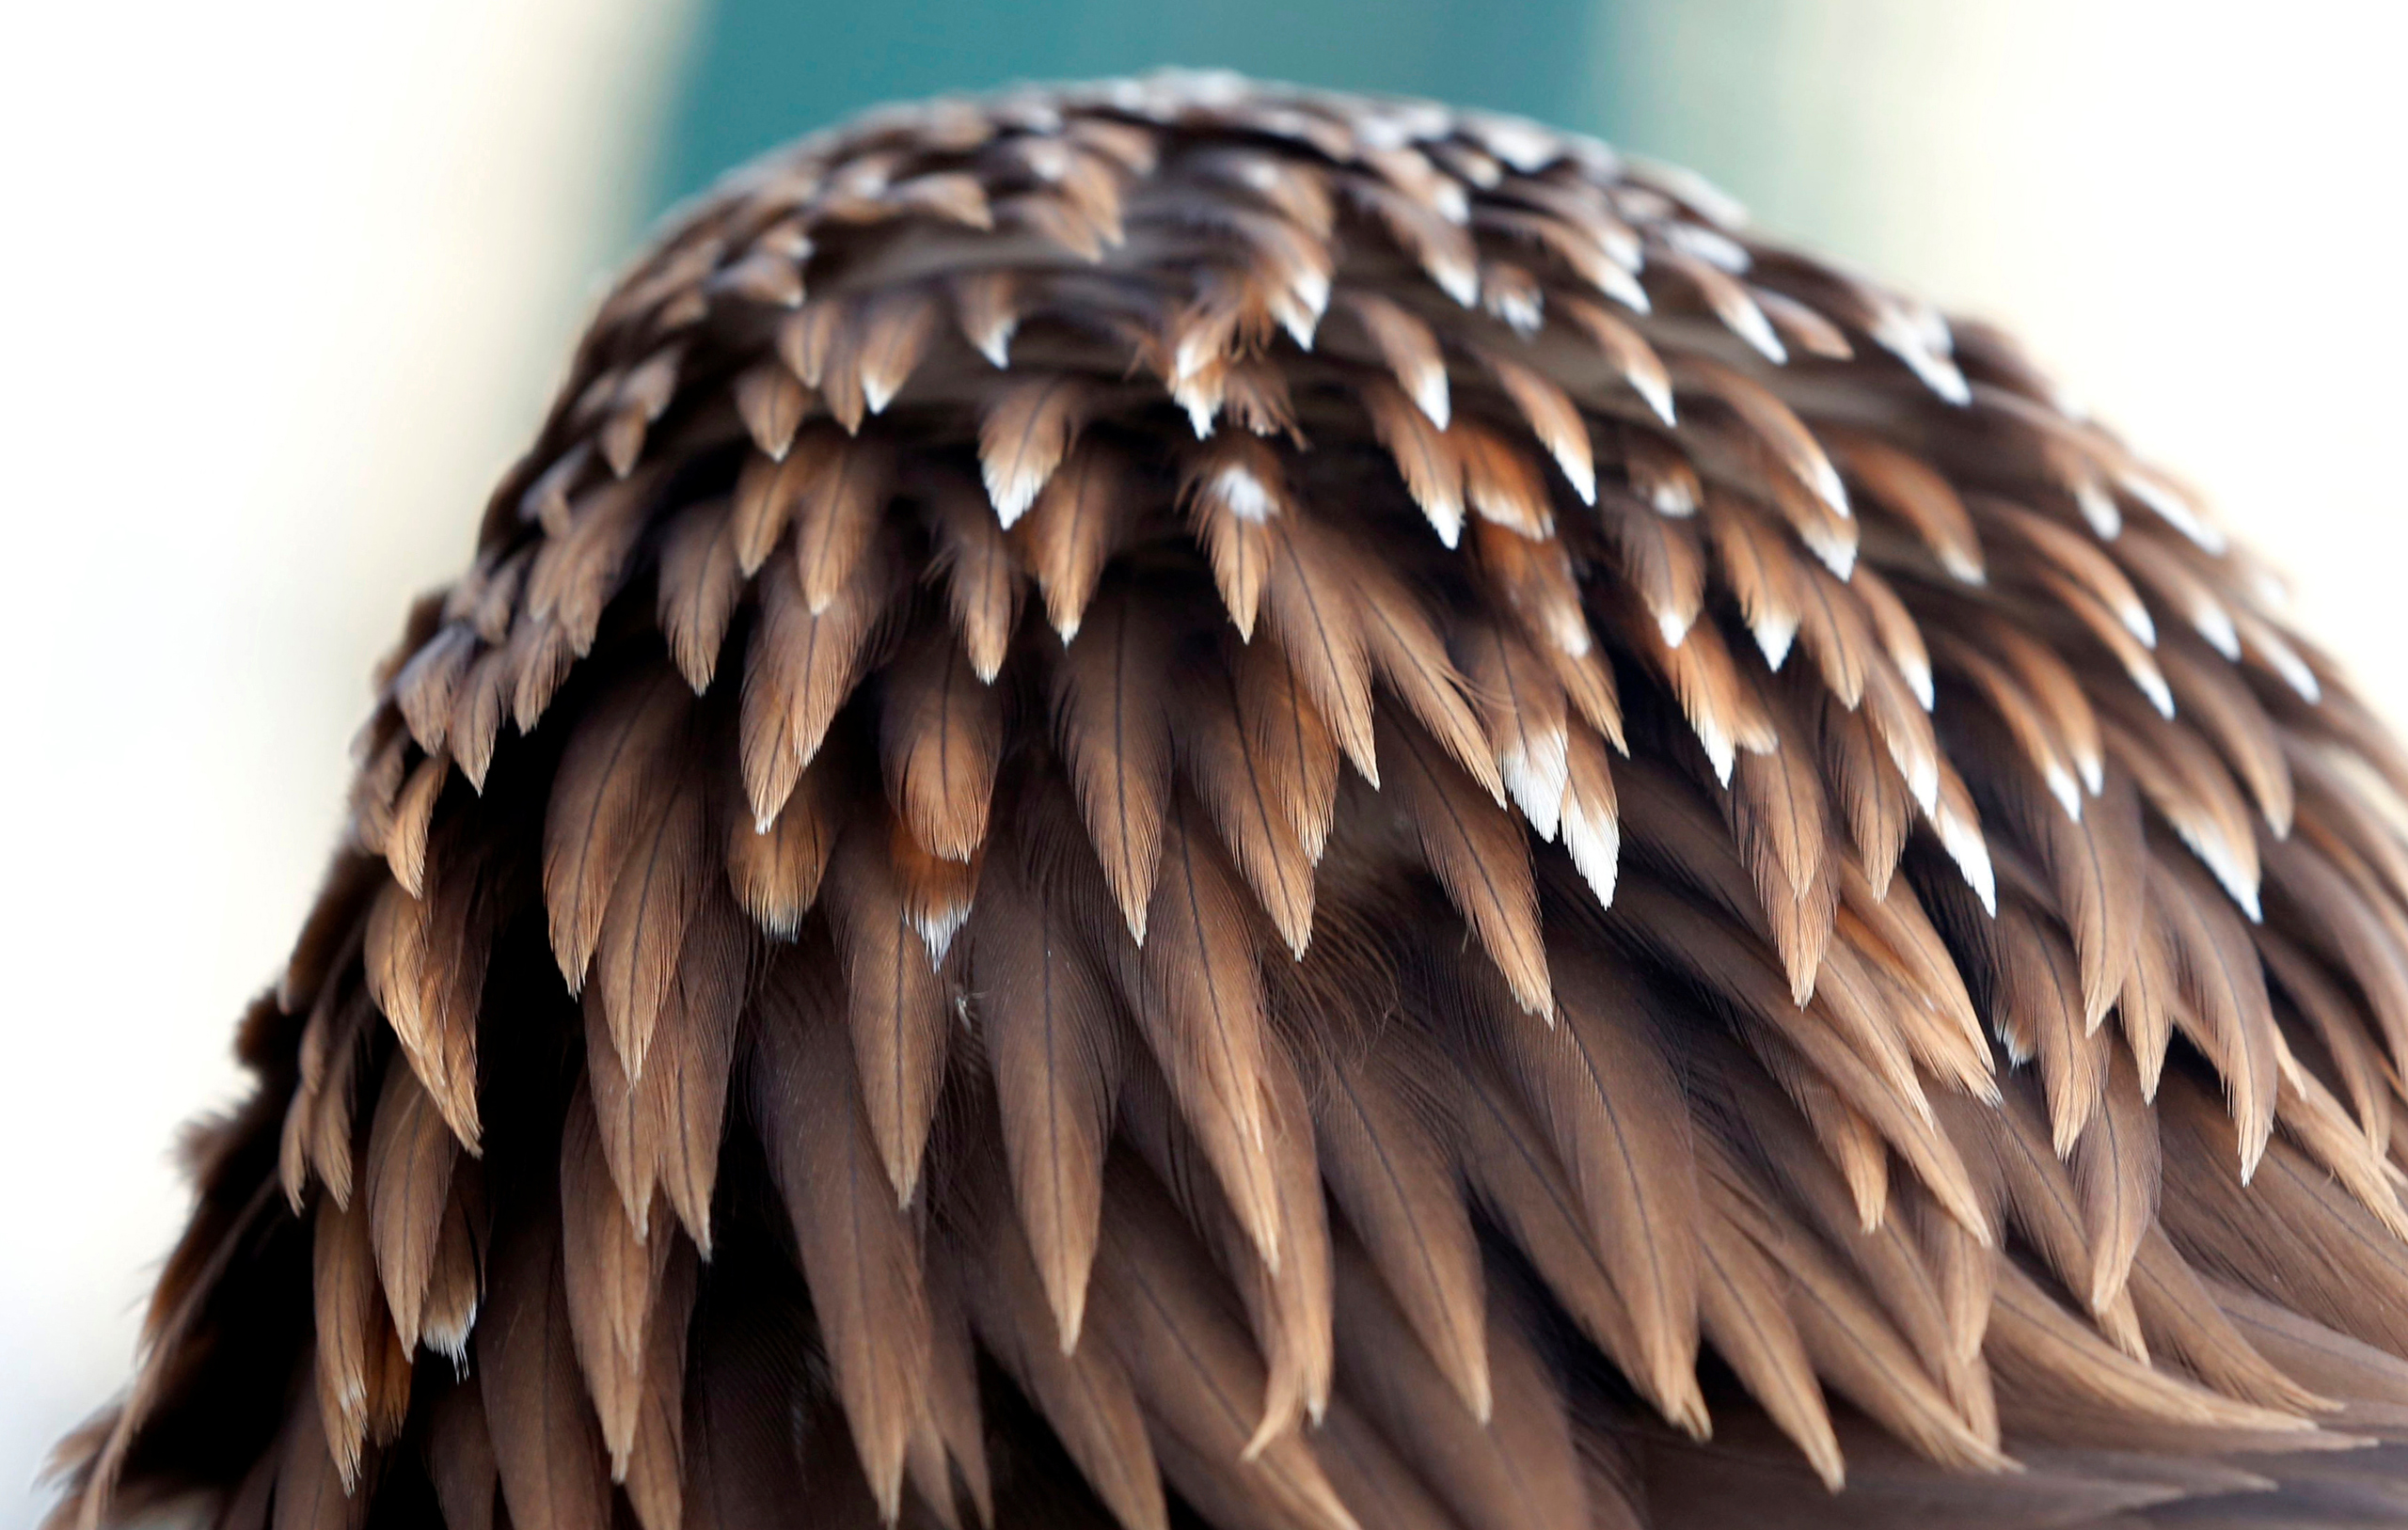 Feathers of a golden eagle are pictured during military training for combat against drones in Mont-de-Marsan French Air Force base in Southwestern France, on Feb. 10, 2017.